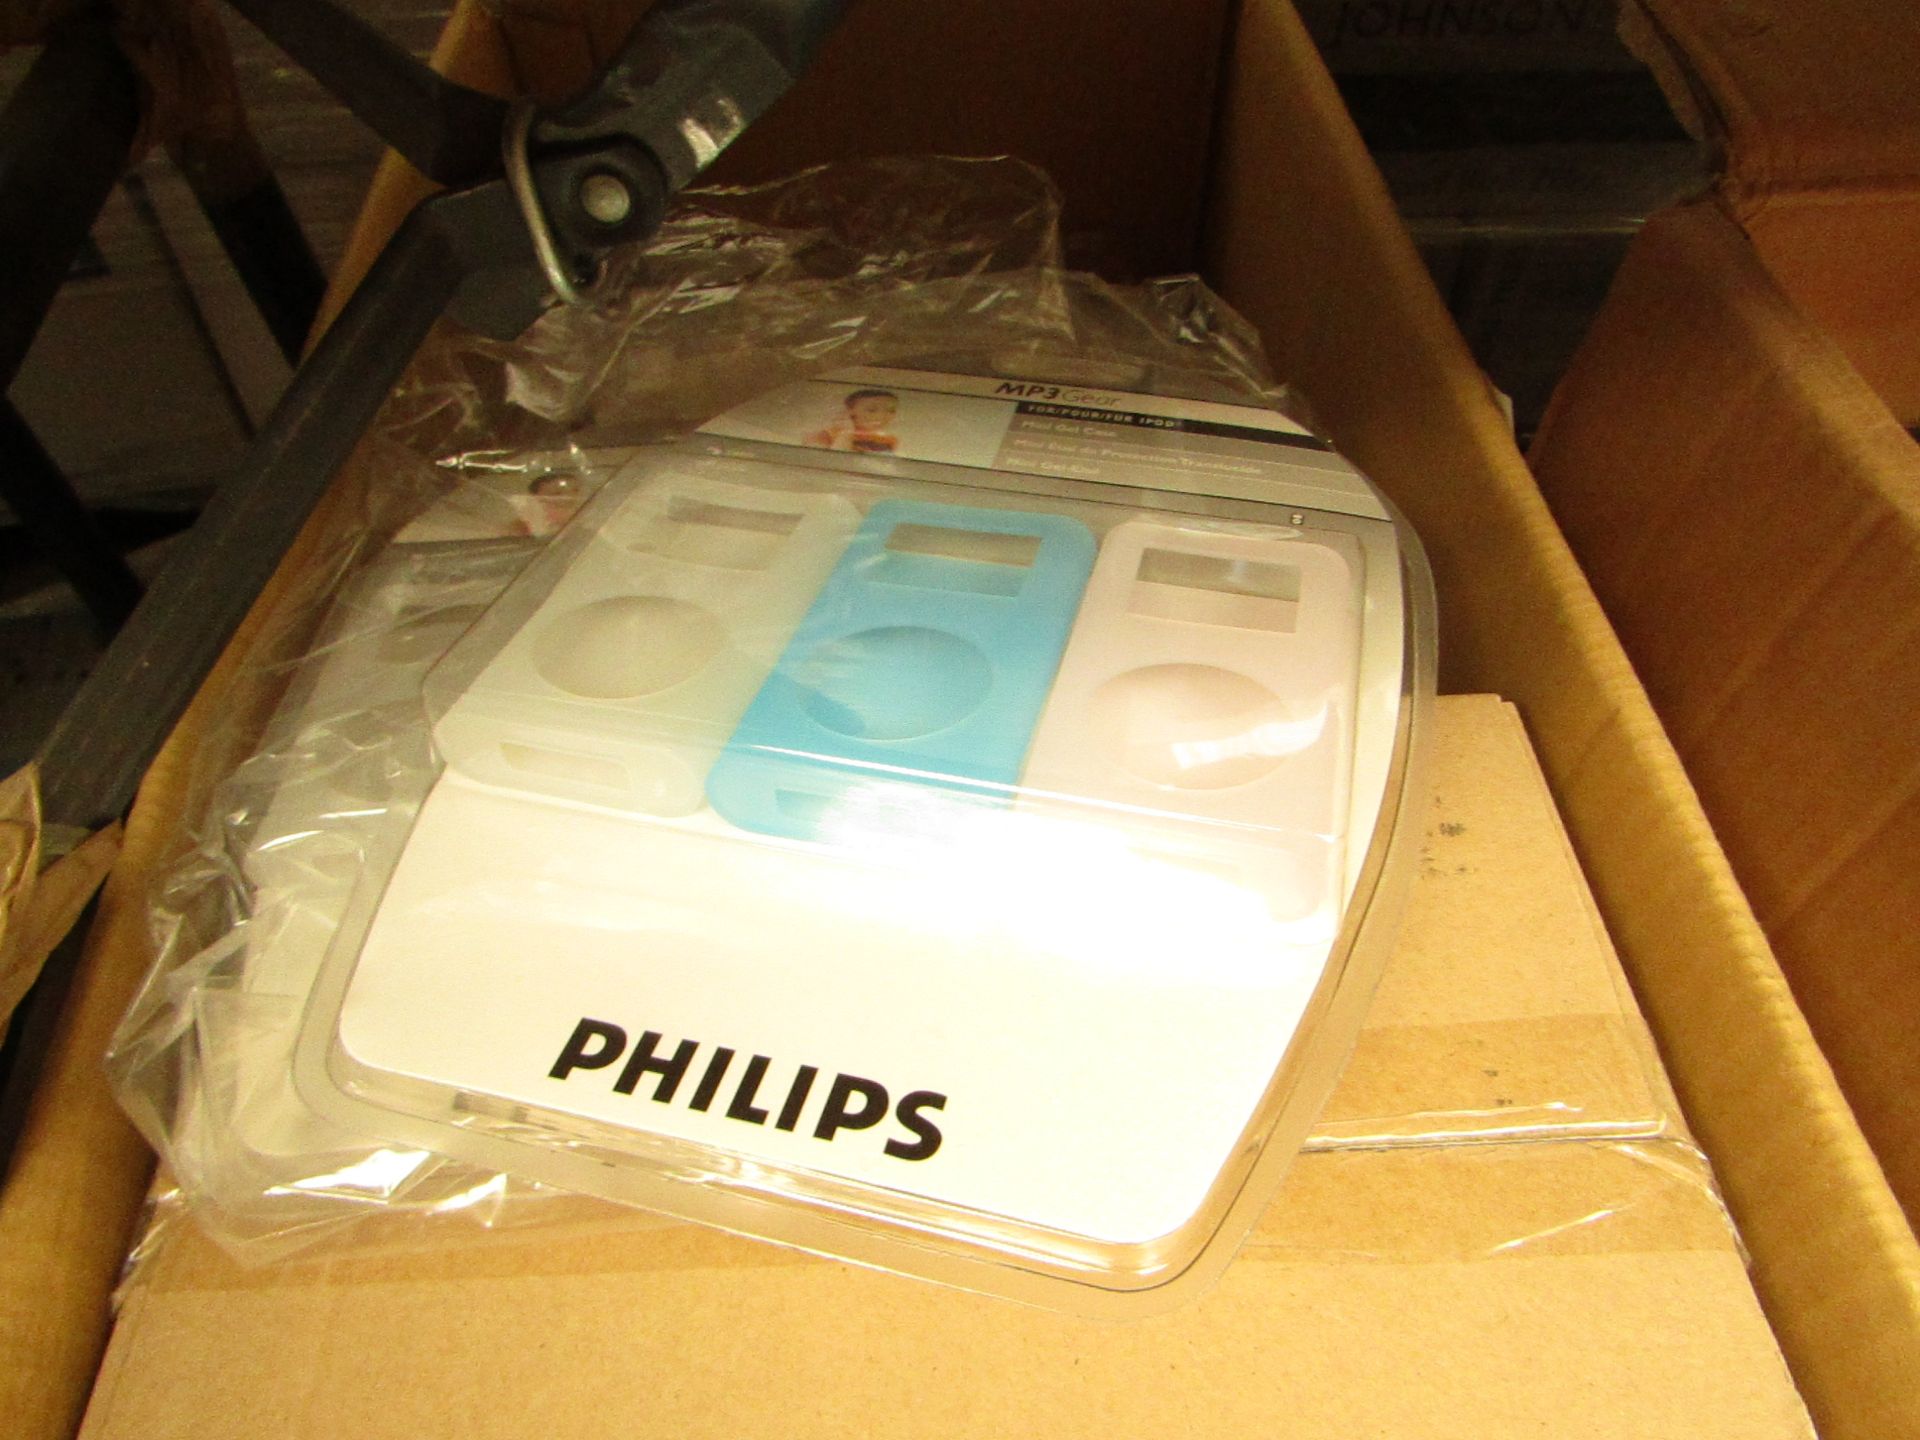 6x Philips MP3 Gear mini gel case, new and packaged.